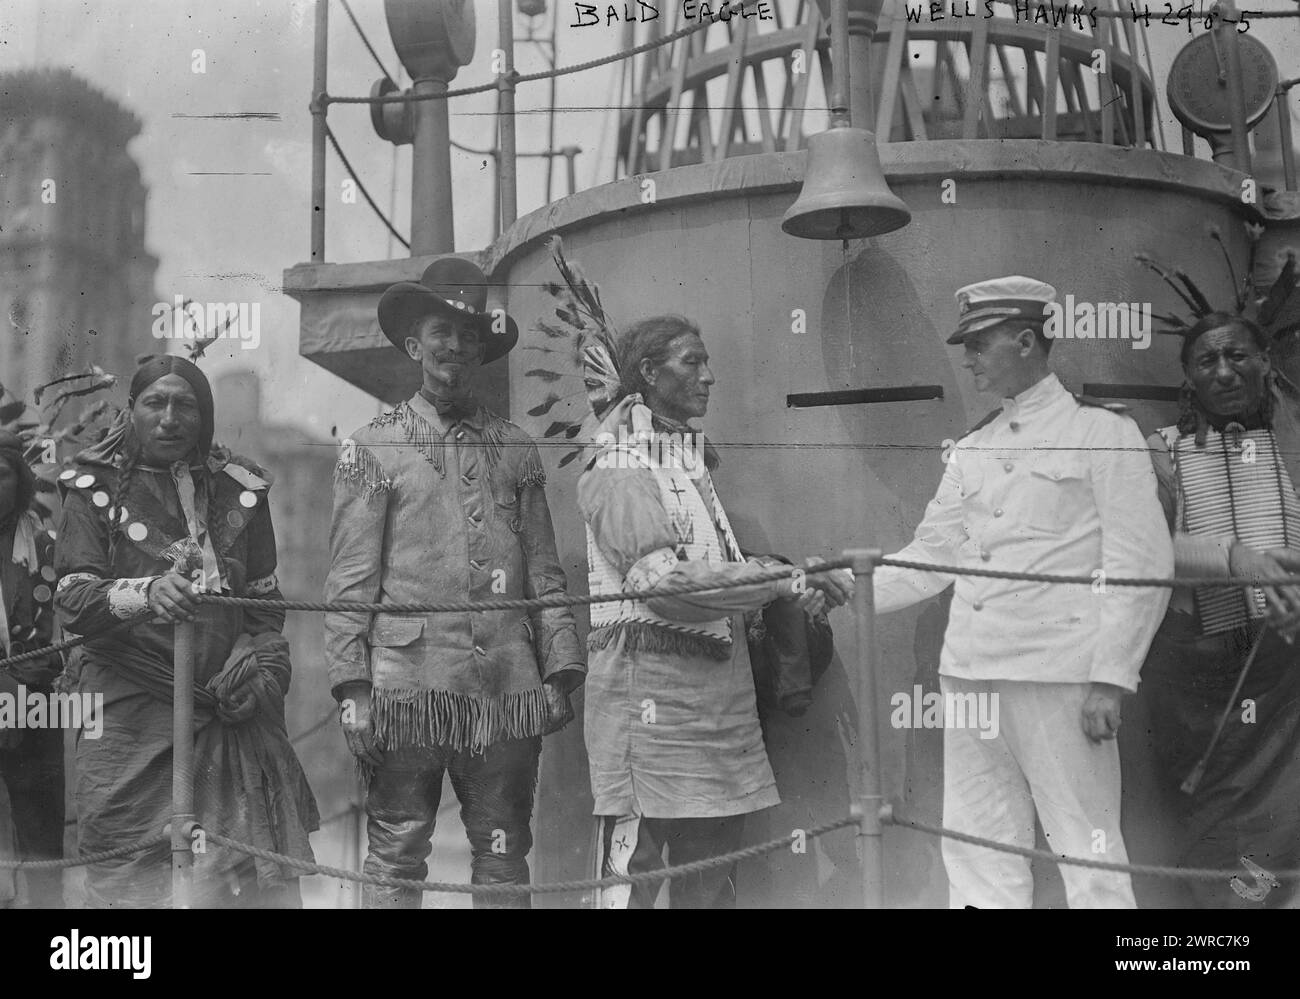 Bald Eagle, Wells Hawks, Photograph shows Native American 'chief Bald Eagle' shaking hands with Lt. Wells Hawks (1870-1941), a member of the Navy's public relations team aboard the USS Recruit. The ship was a wooden mockup of a battleship built in Union Square, New York City by the Navy to recruit seamen and sell Liberty Bonds during World War I., 1917 July 28, World War, 1914-1918, Glass negatives, 1 negative: glass Stock Photo